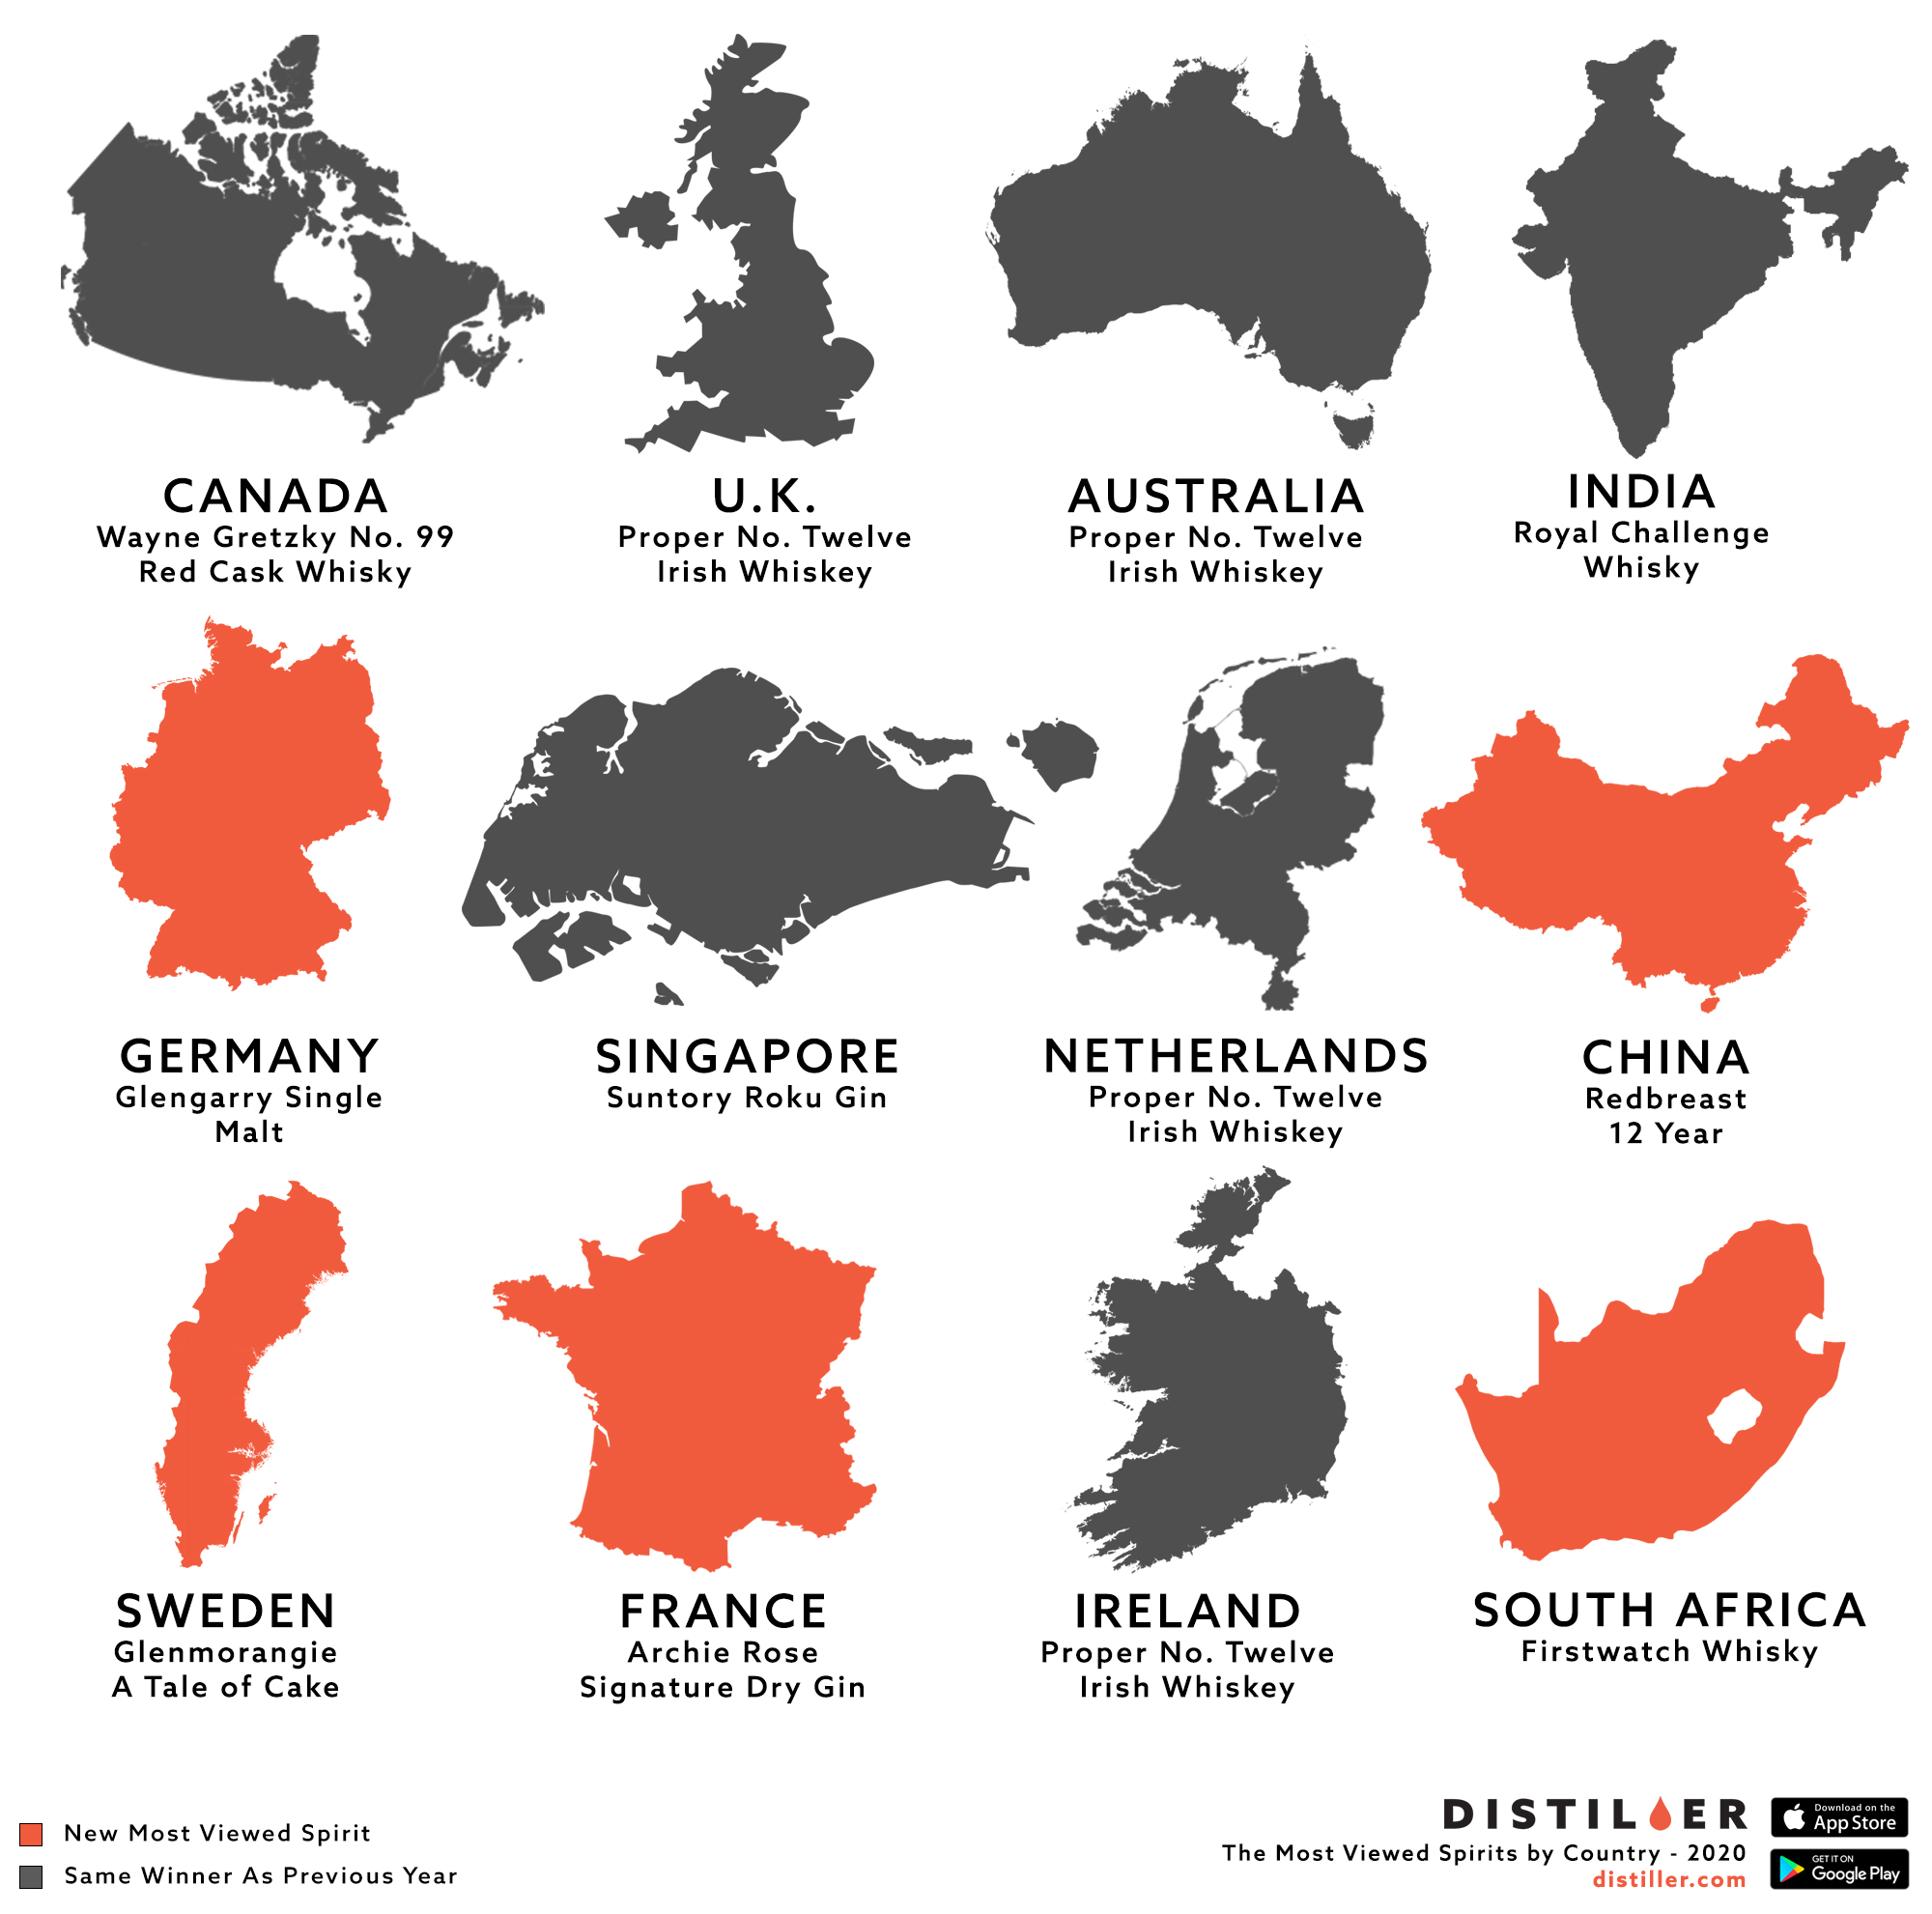 Distiller in 2020: The Top Spirits By Country